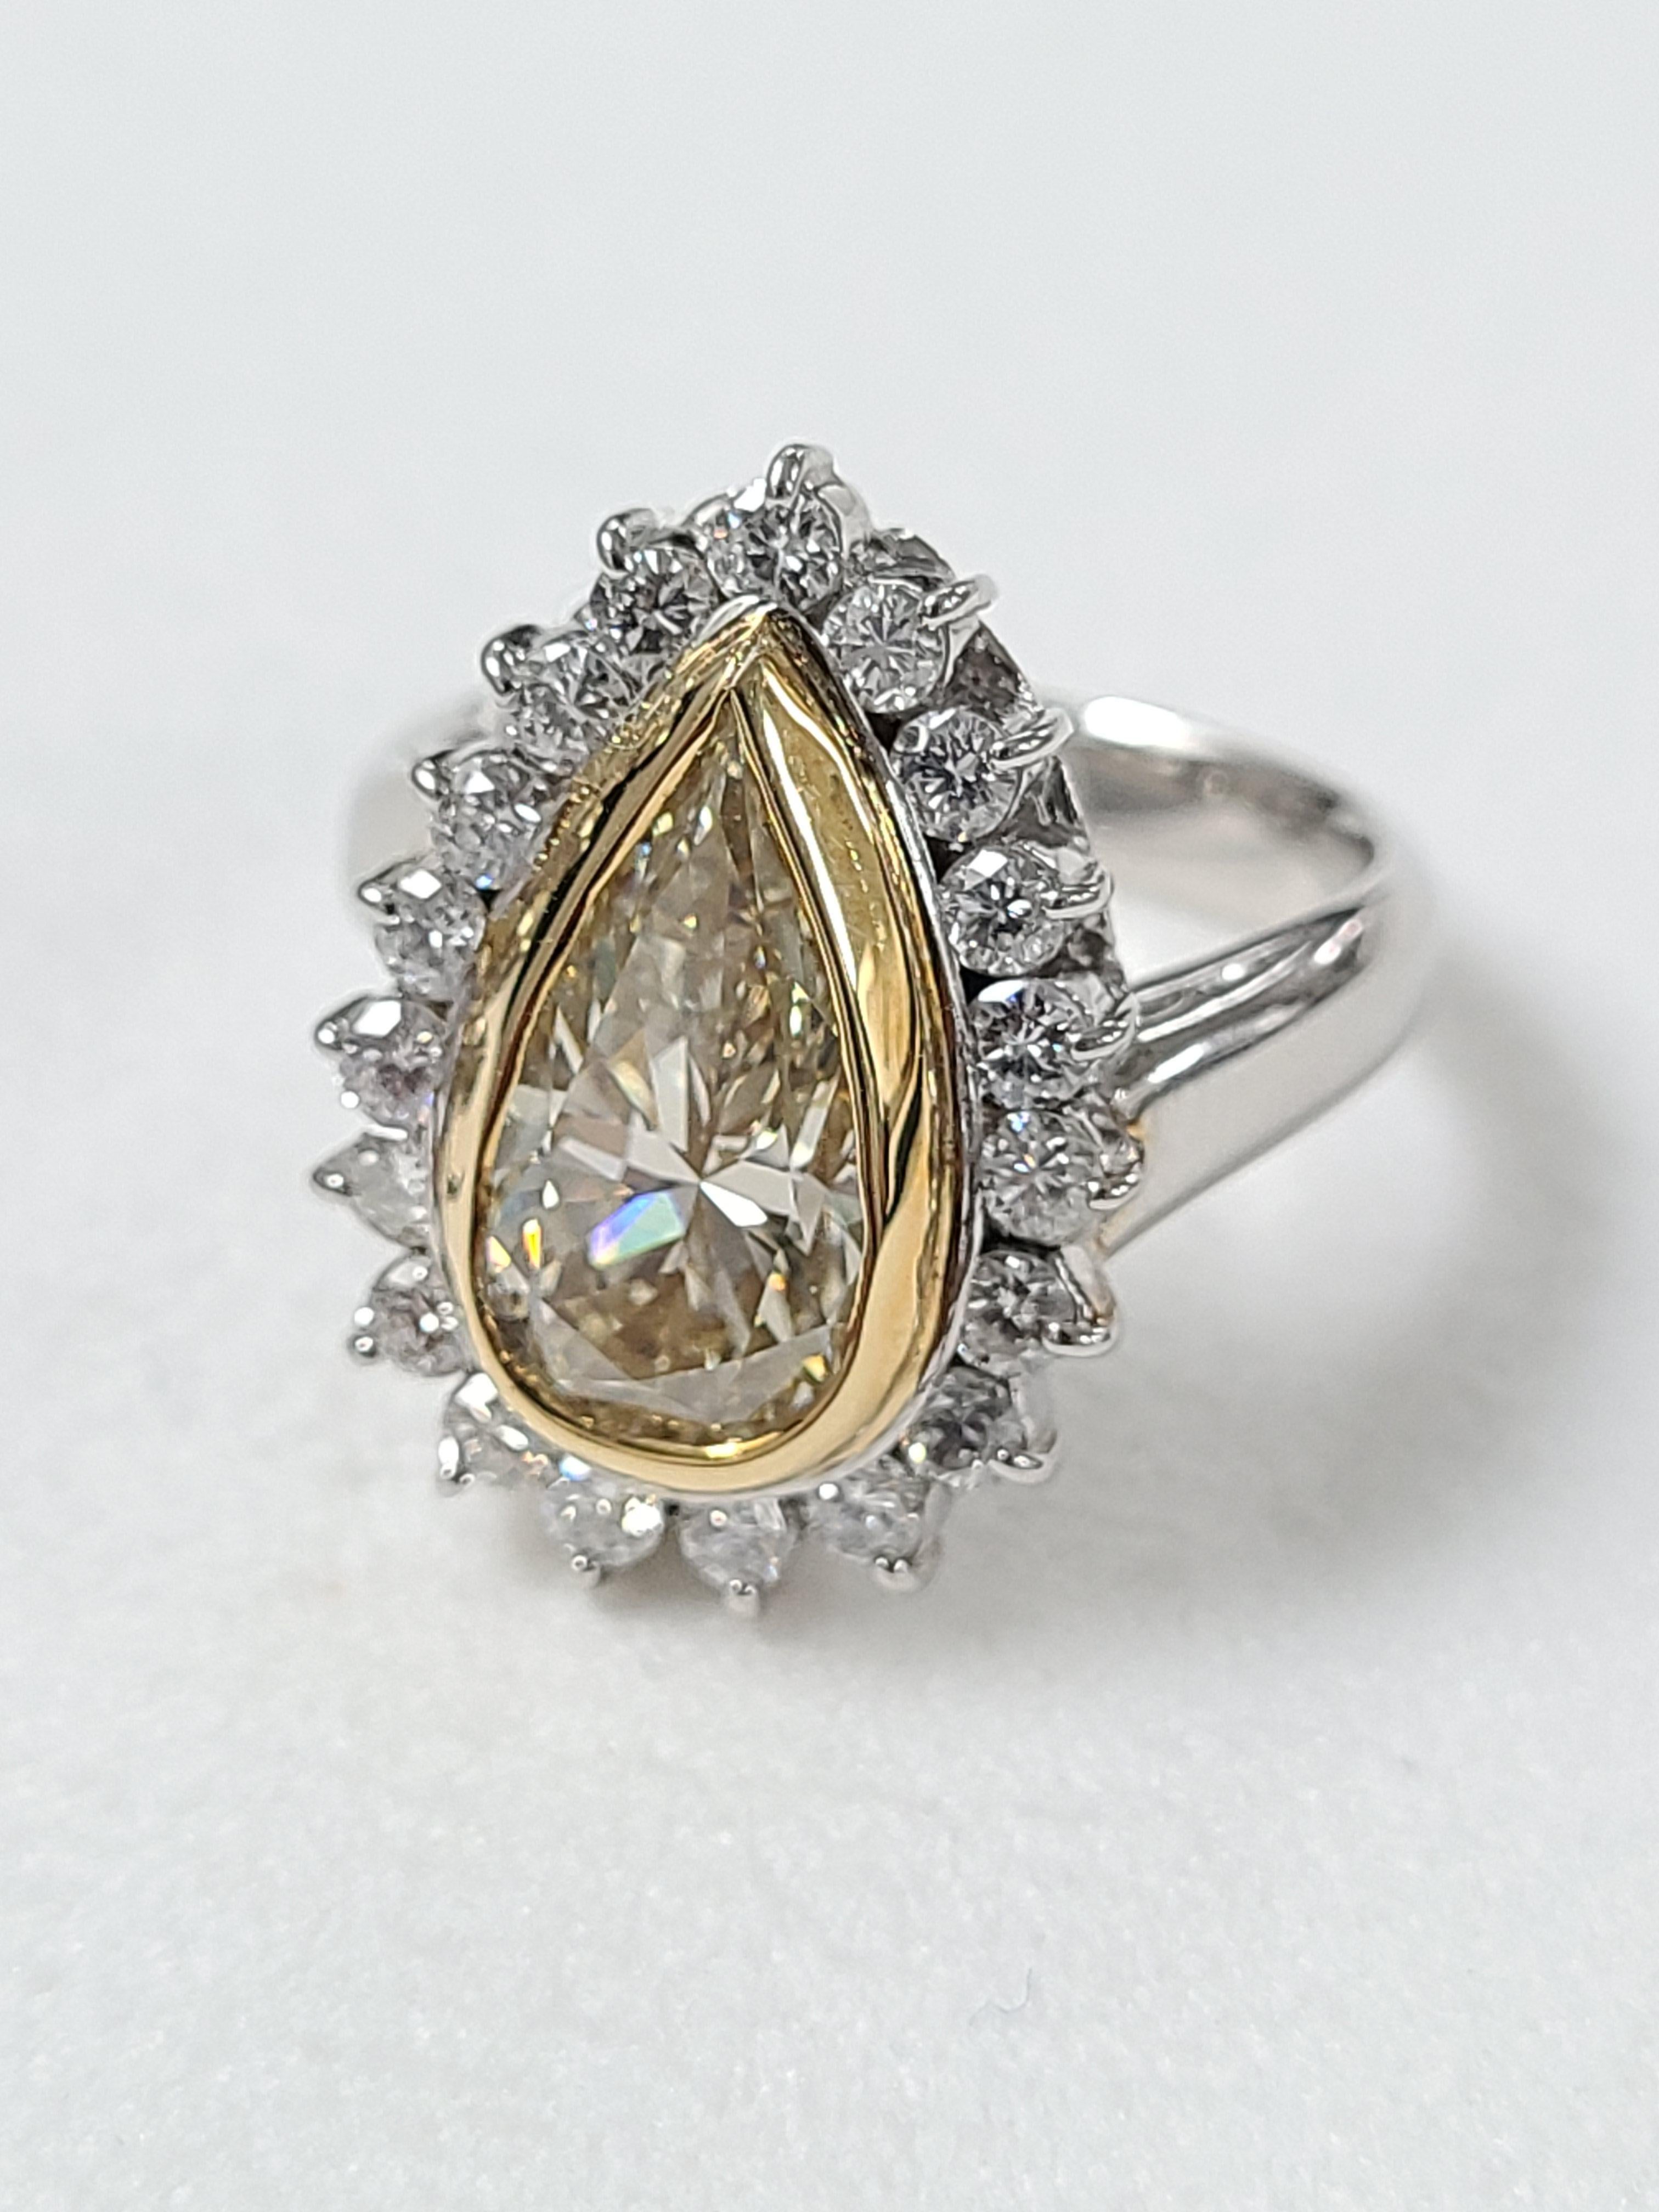 A gorgeous and Art deco style ring . The centre Pear diamond is 3.64 carat surrounded by smaller .81 carat diamond . The ring dimension in cm 1.8 x 1.4 x 2.5 . US size 7 1/2. Clarity SI2 Color Light Yellow .
